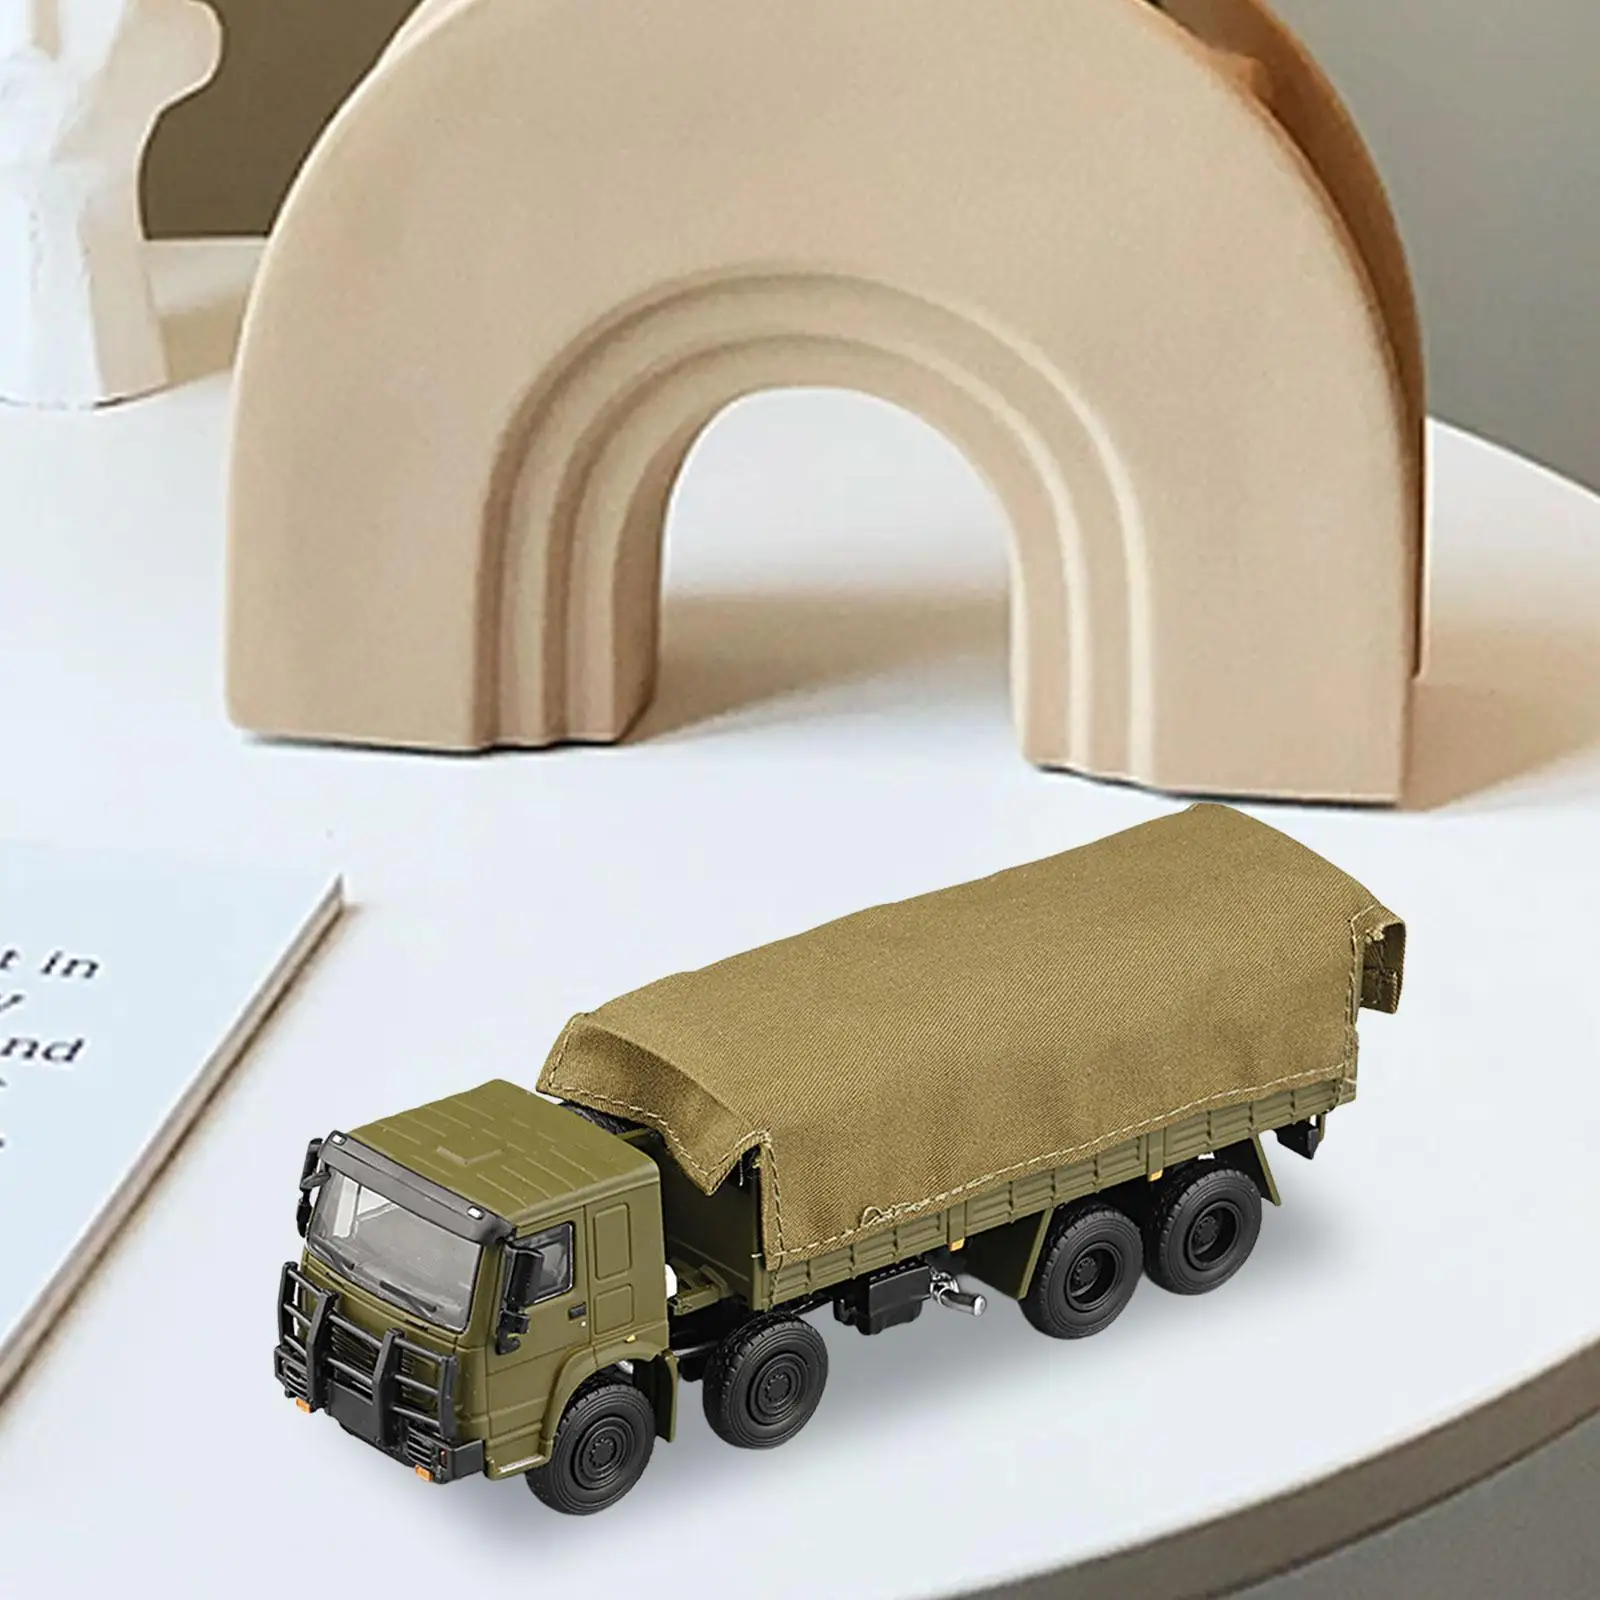 1/64 Transport Truck Diecast Toys Adults Gifts Desk Decoration Collection for Miniature Scene Photography Props Decoration